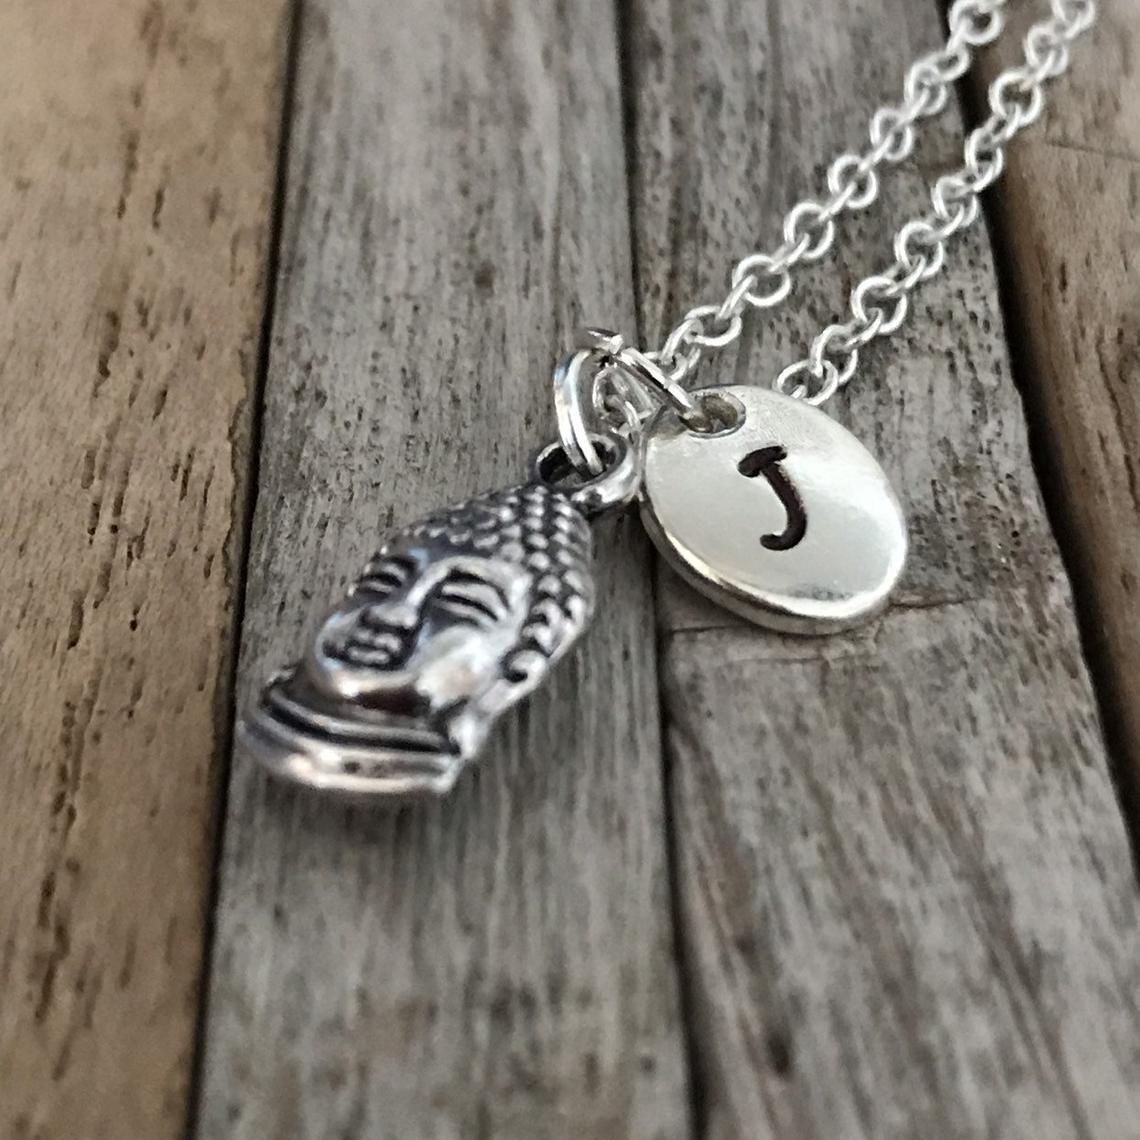 Buddha or Buddah necklace with initial charm